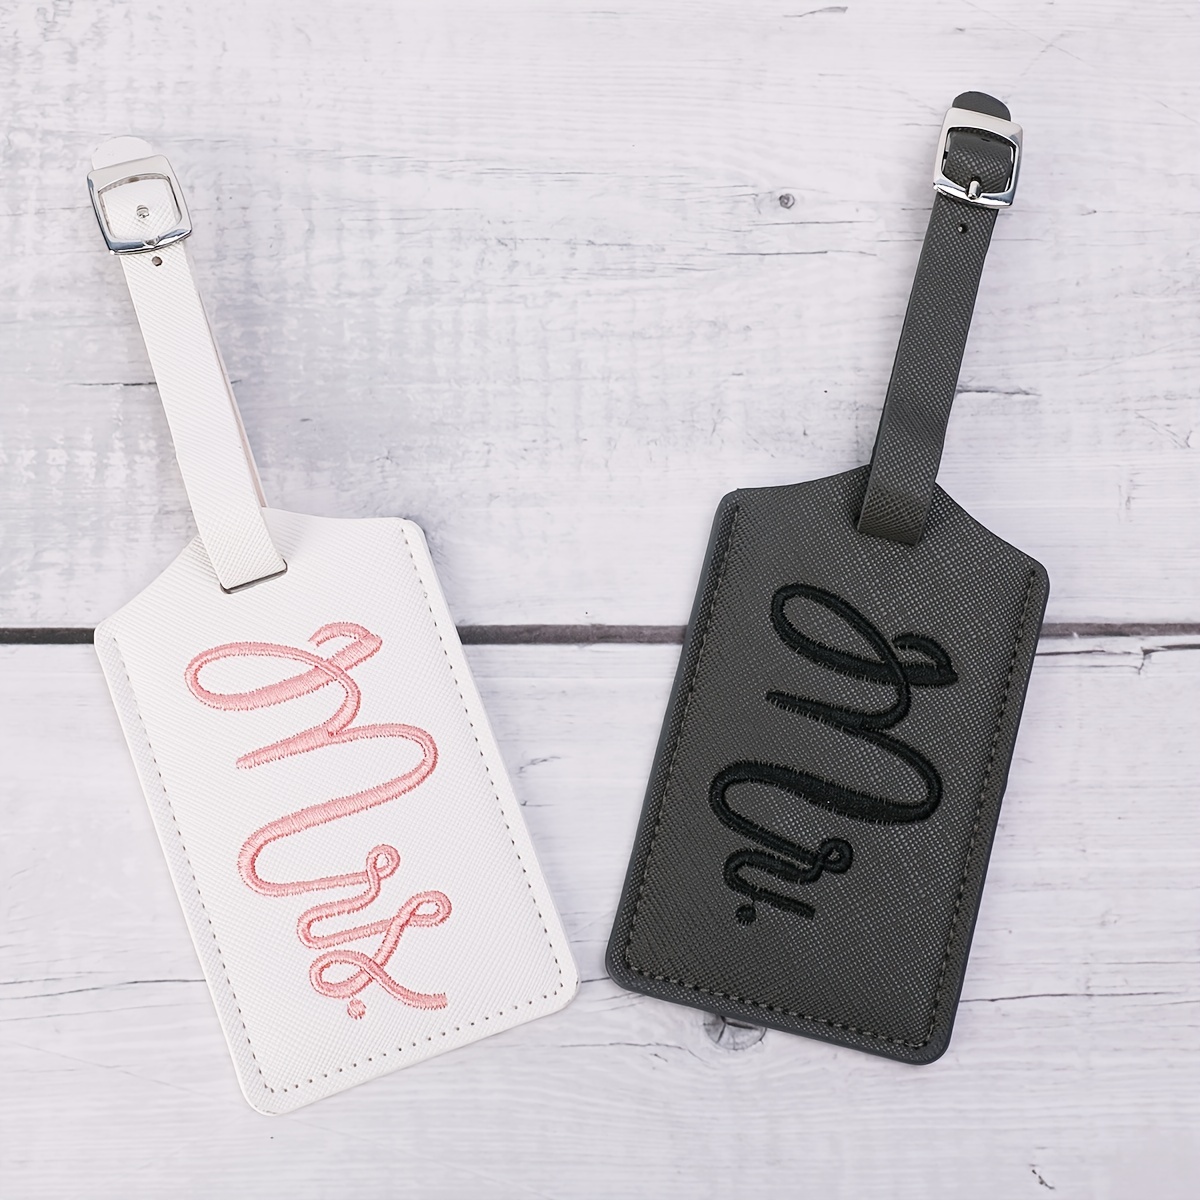 Mr and Mrs Luggage Tags, Wedding Gifts Personalized Gifts for